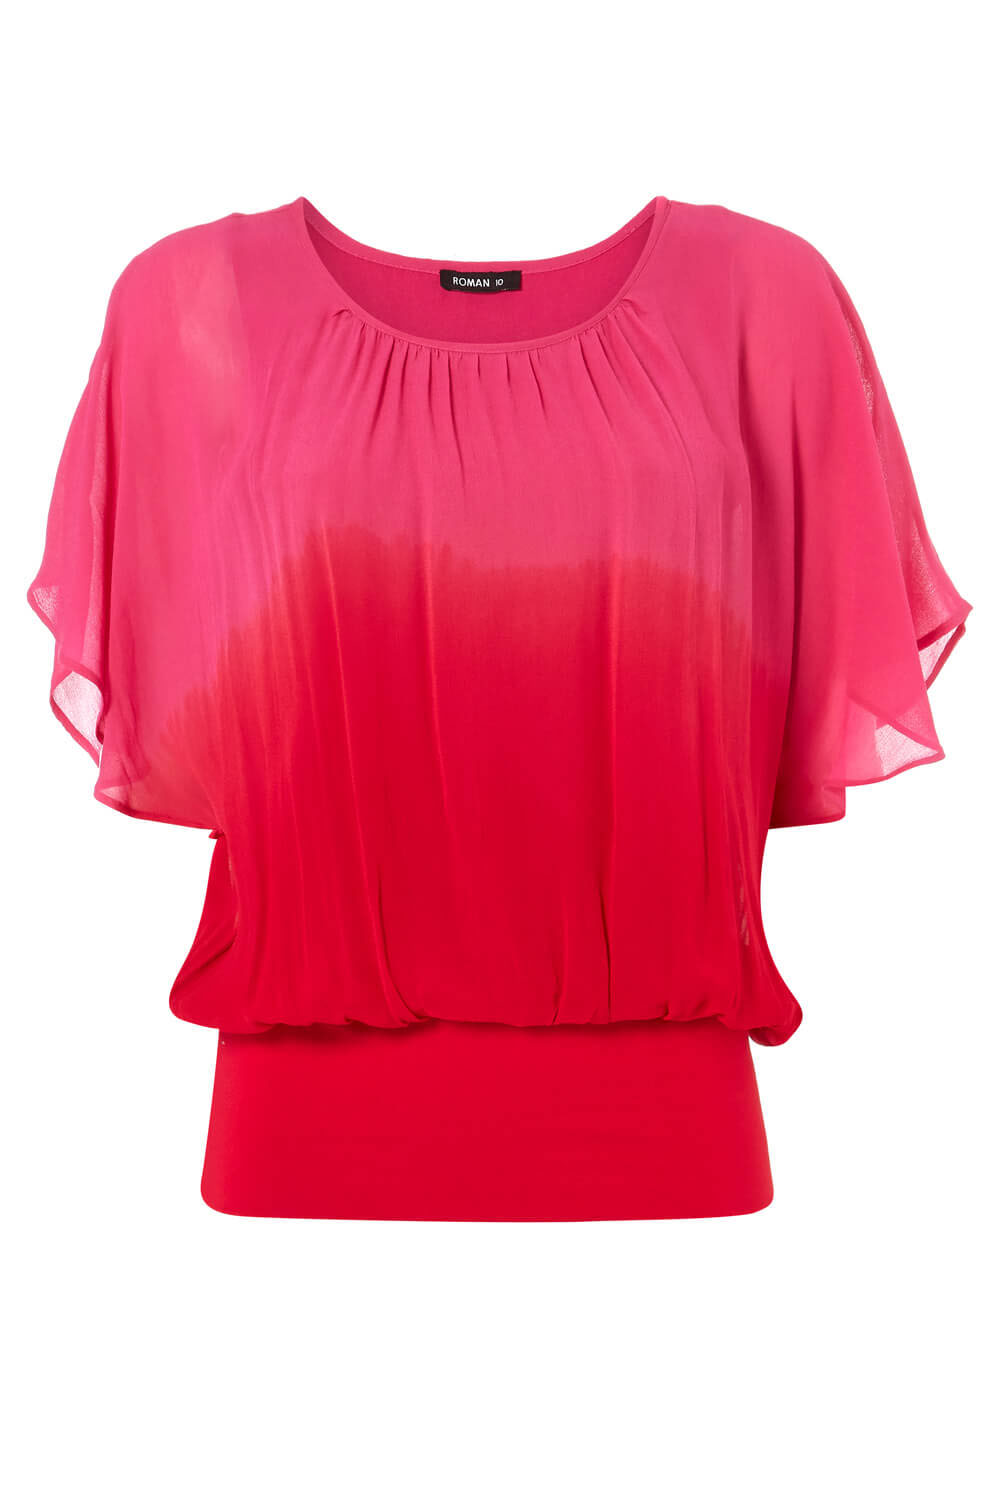 Fuchsia Ombre Batwing Overlay Top, Image 5 of 5